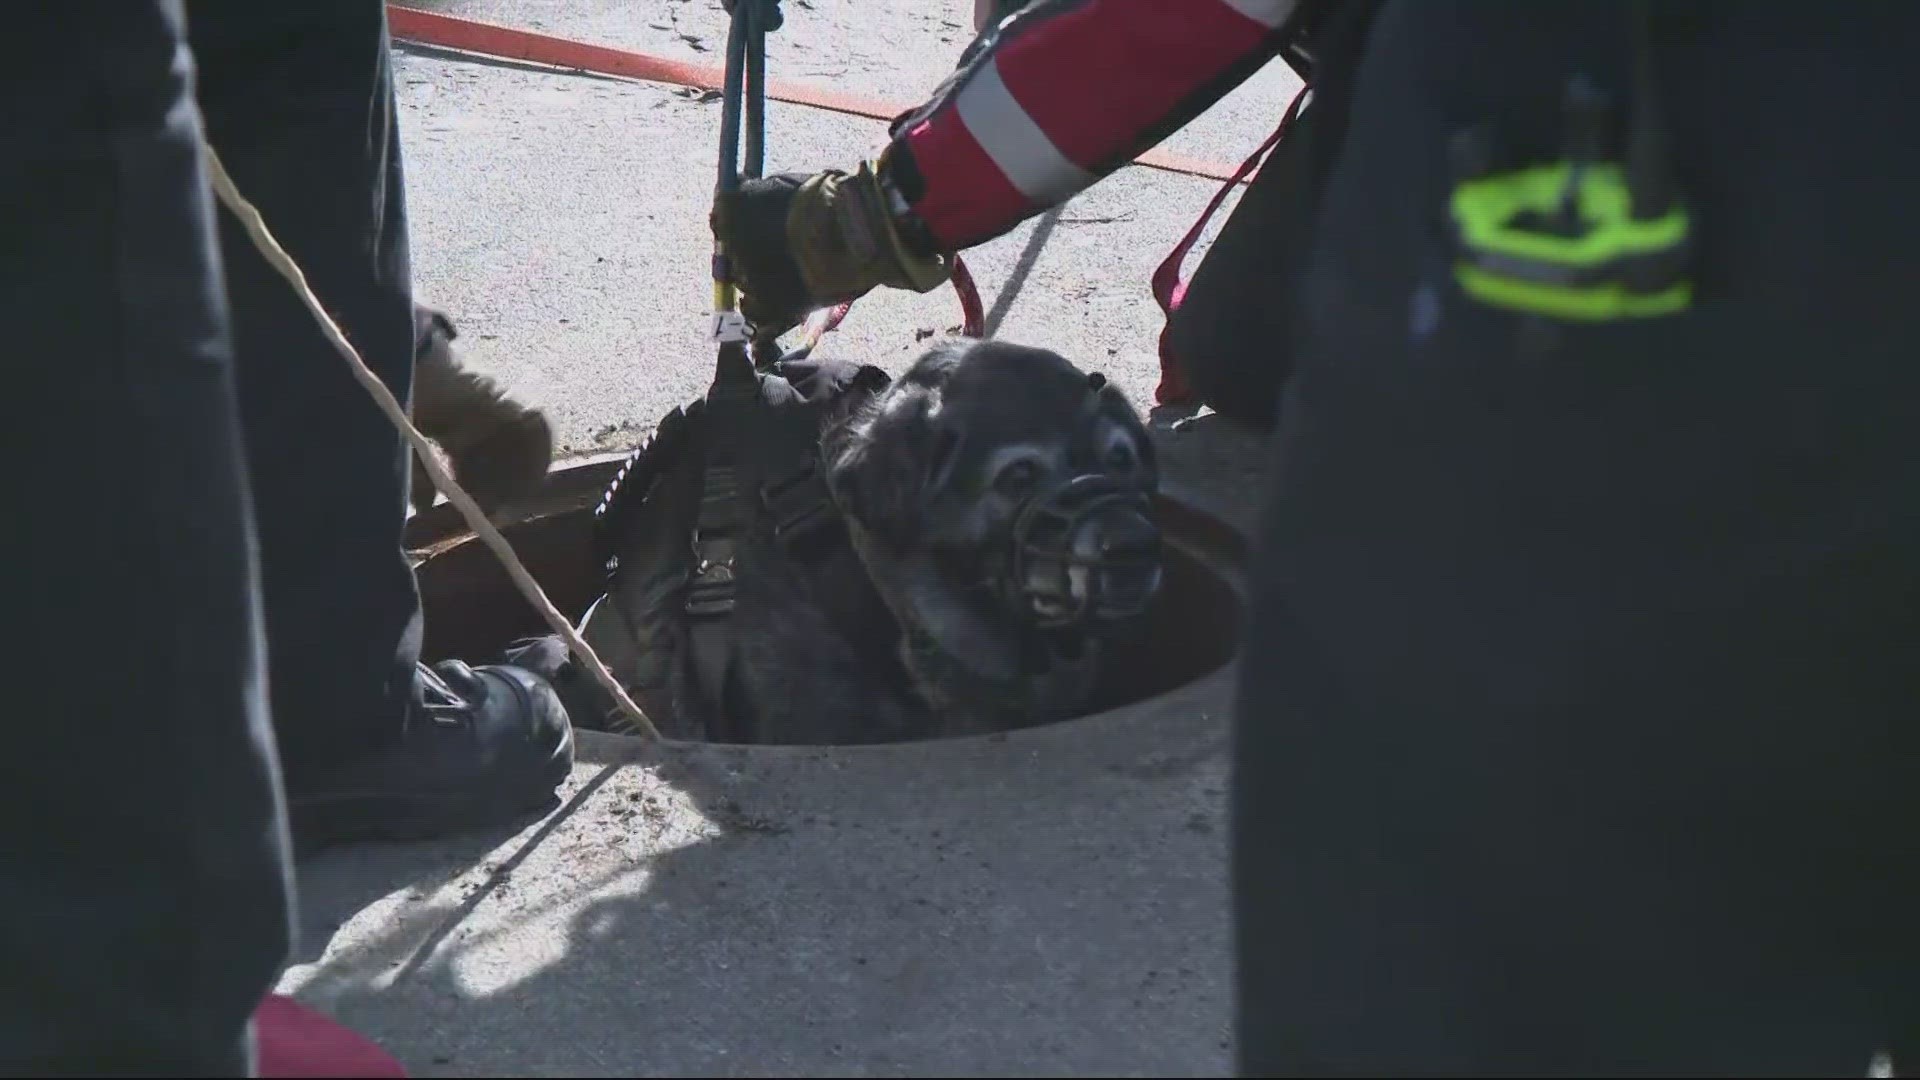 Portland firefighters rescued a 14-year-old dog that fell down a manhole on Friday. The dog, named Tess, was down there for about an hour but wasn't injured.